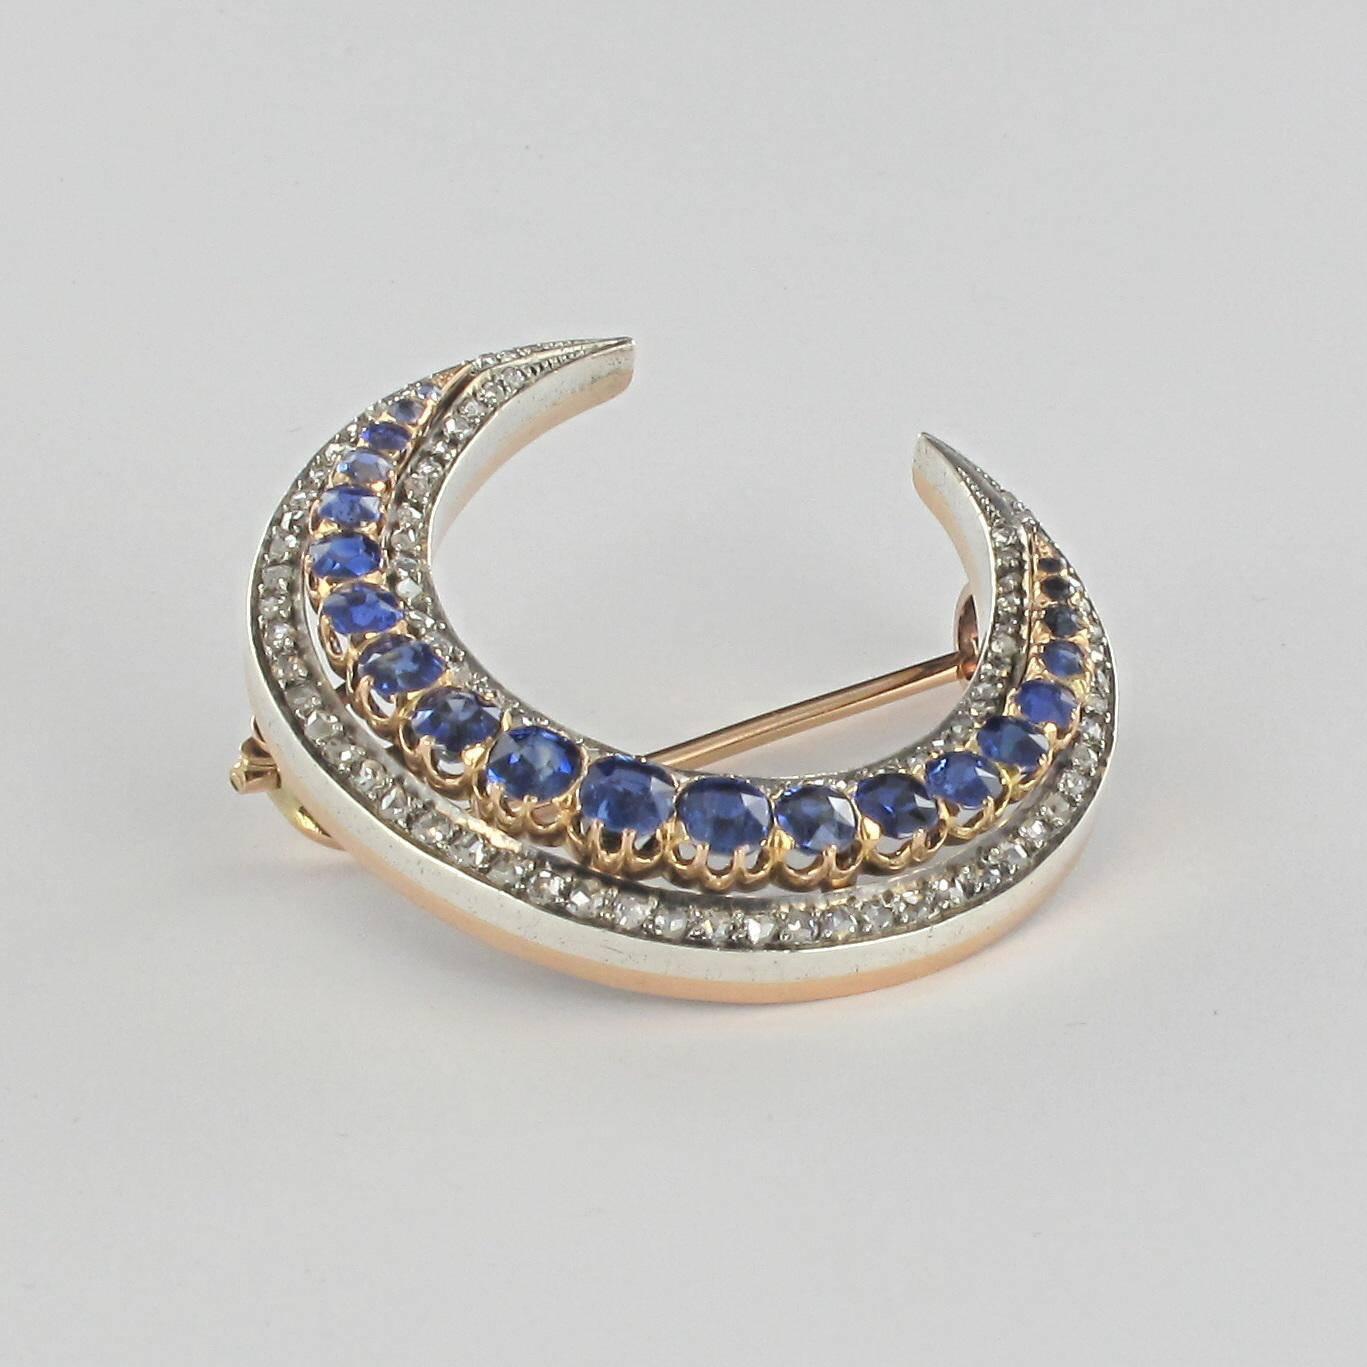 French Napoleon 3 Antique Crescent Moon Sapphire Diamond Brooch  For Sale 2